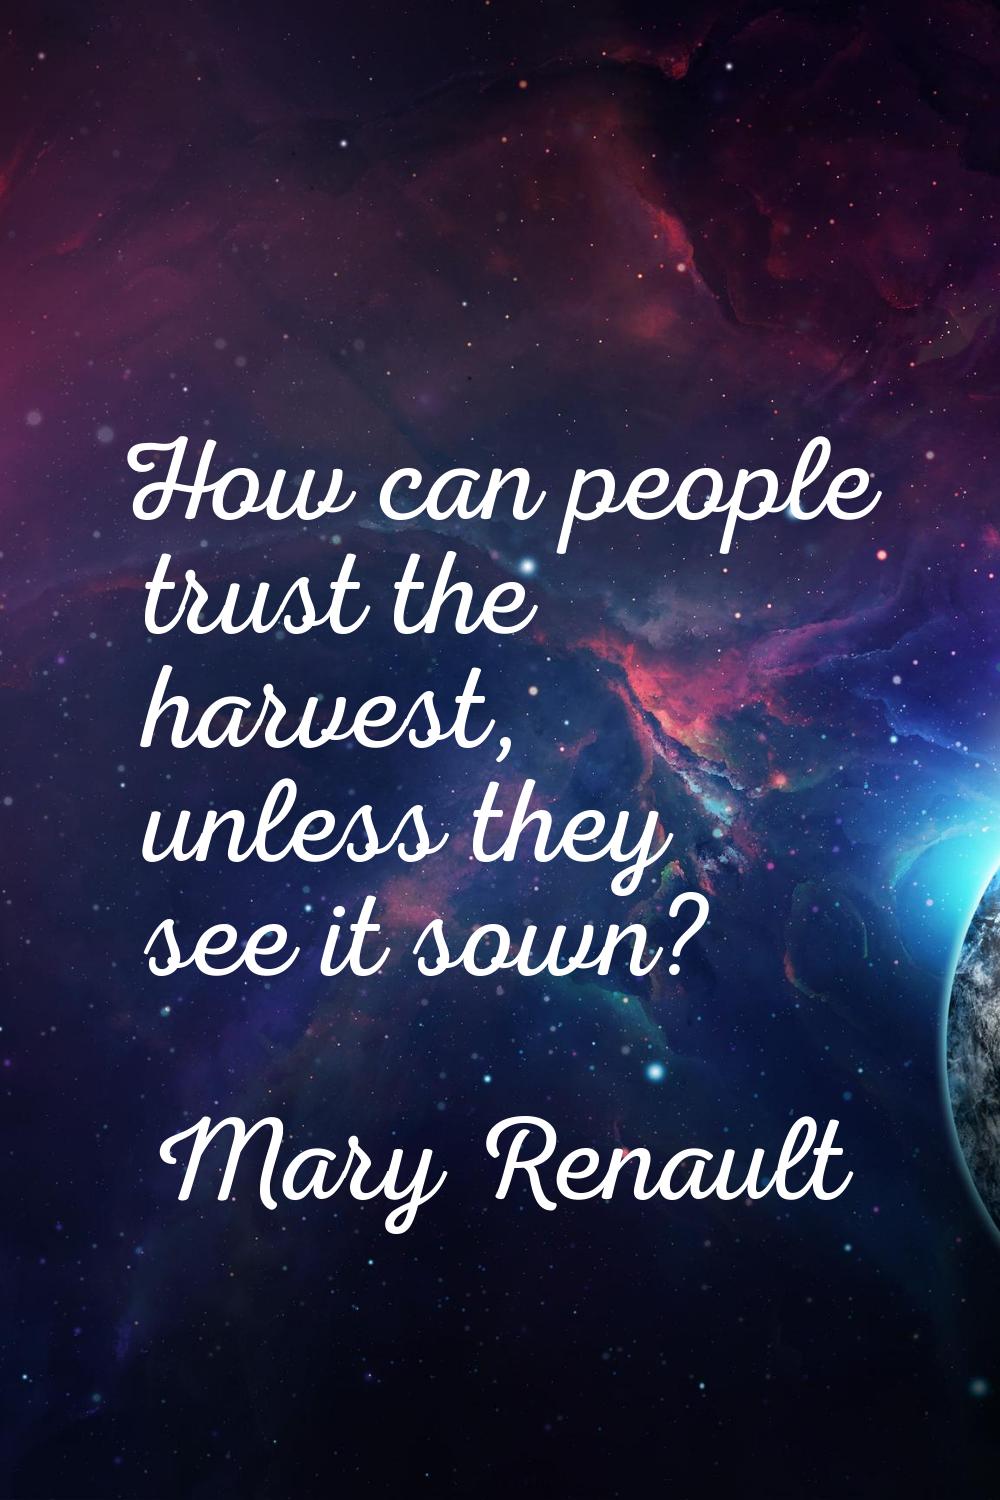 How can people trust the harvest, unless they see it sown?